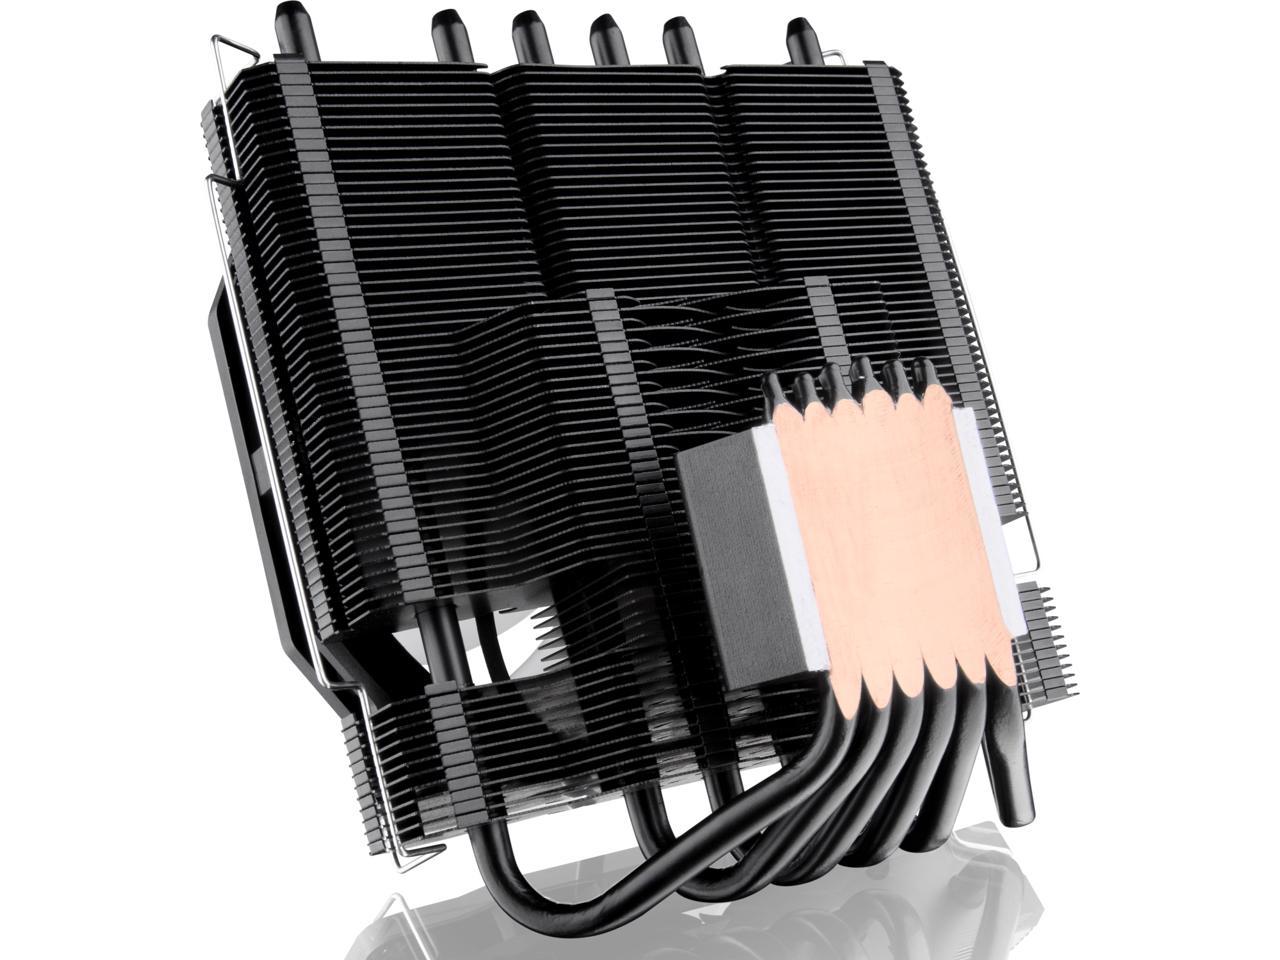 PALLAS 120, a Low profile CPU cooler, is designed for most desktops, especially for HTPC's and narrow enclosures. 6*6mm Heat-pipe, total height 68mm, 12013 PWM fan, compatible with all modern CPU